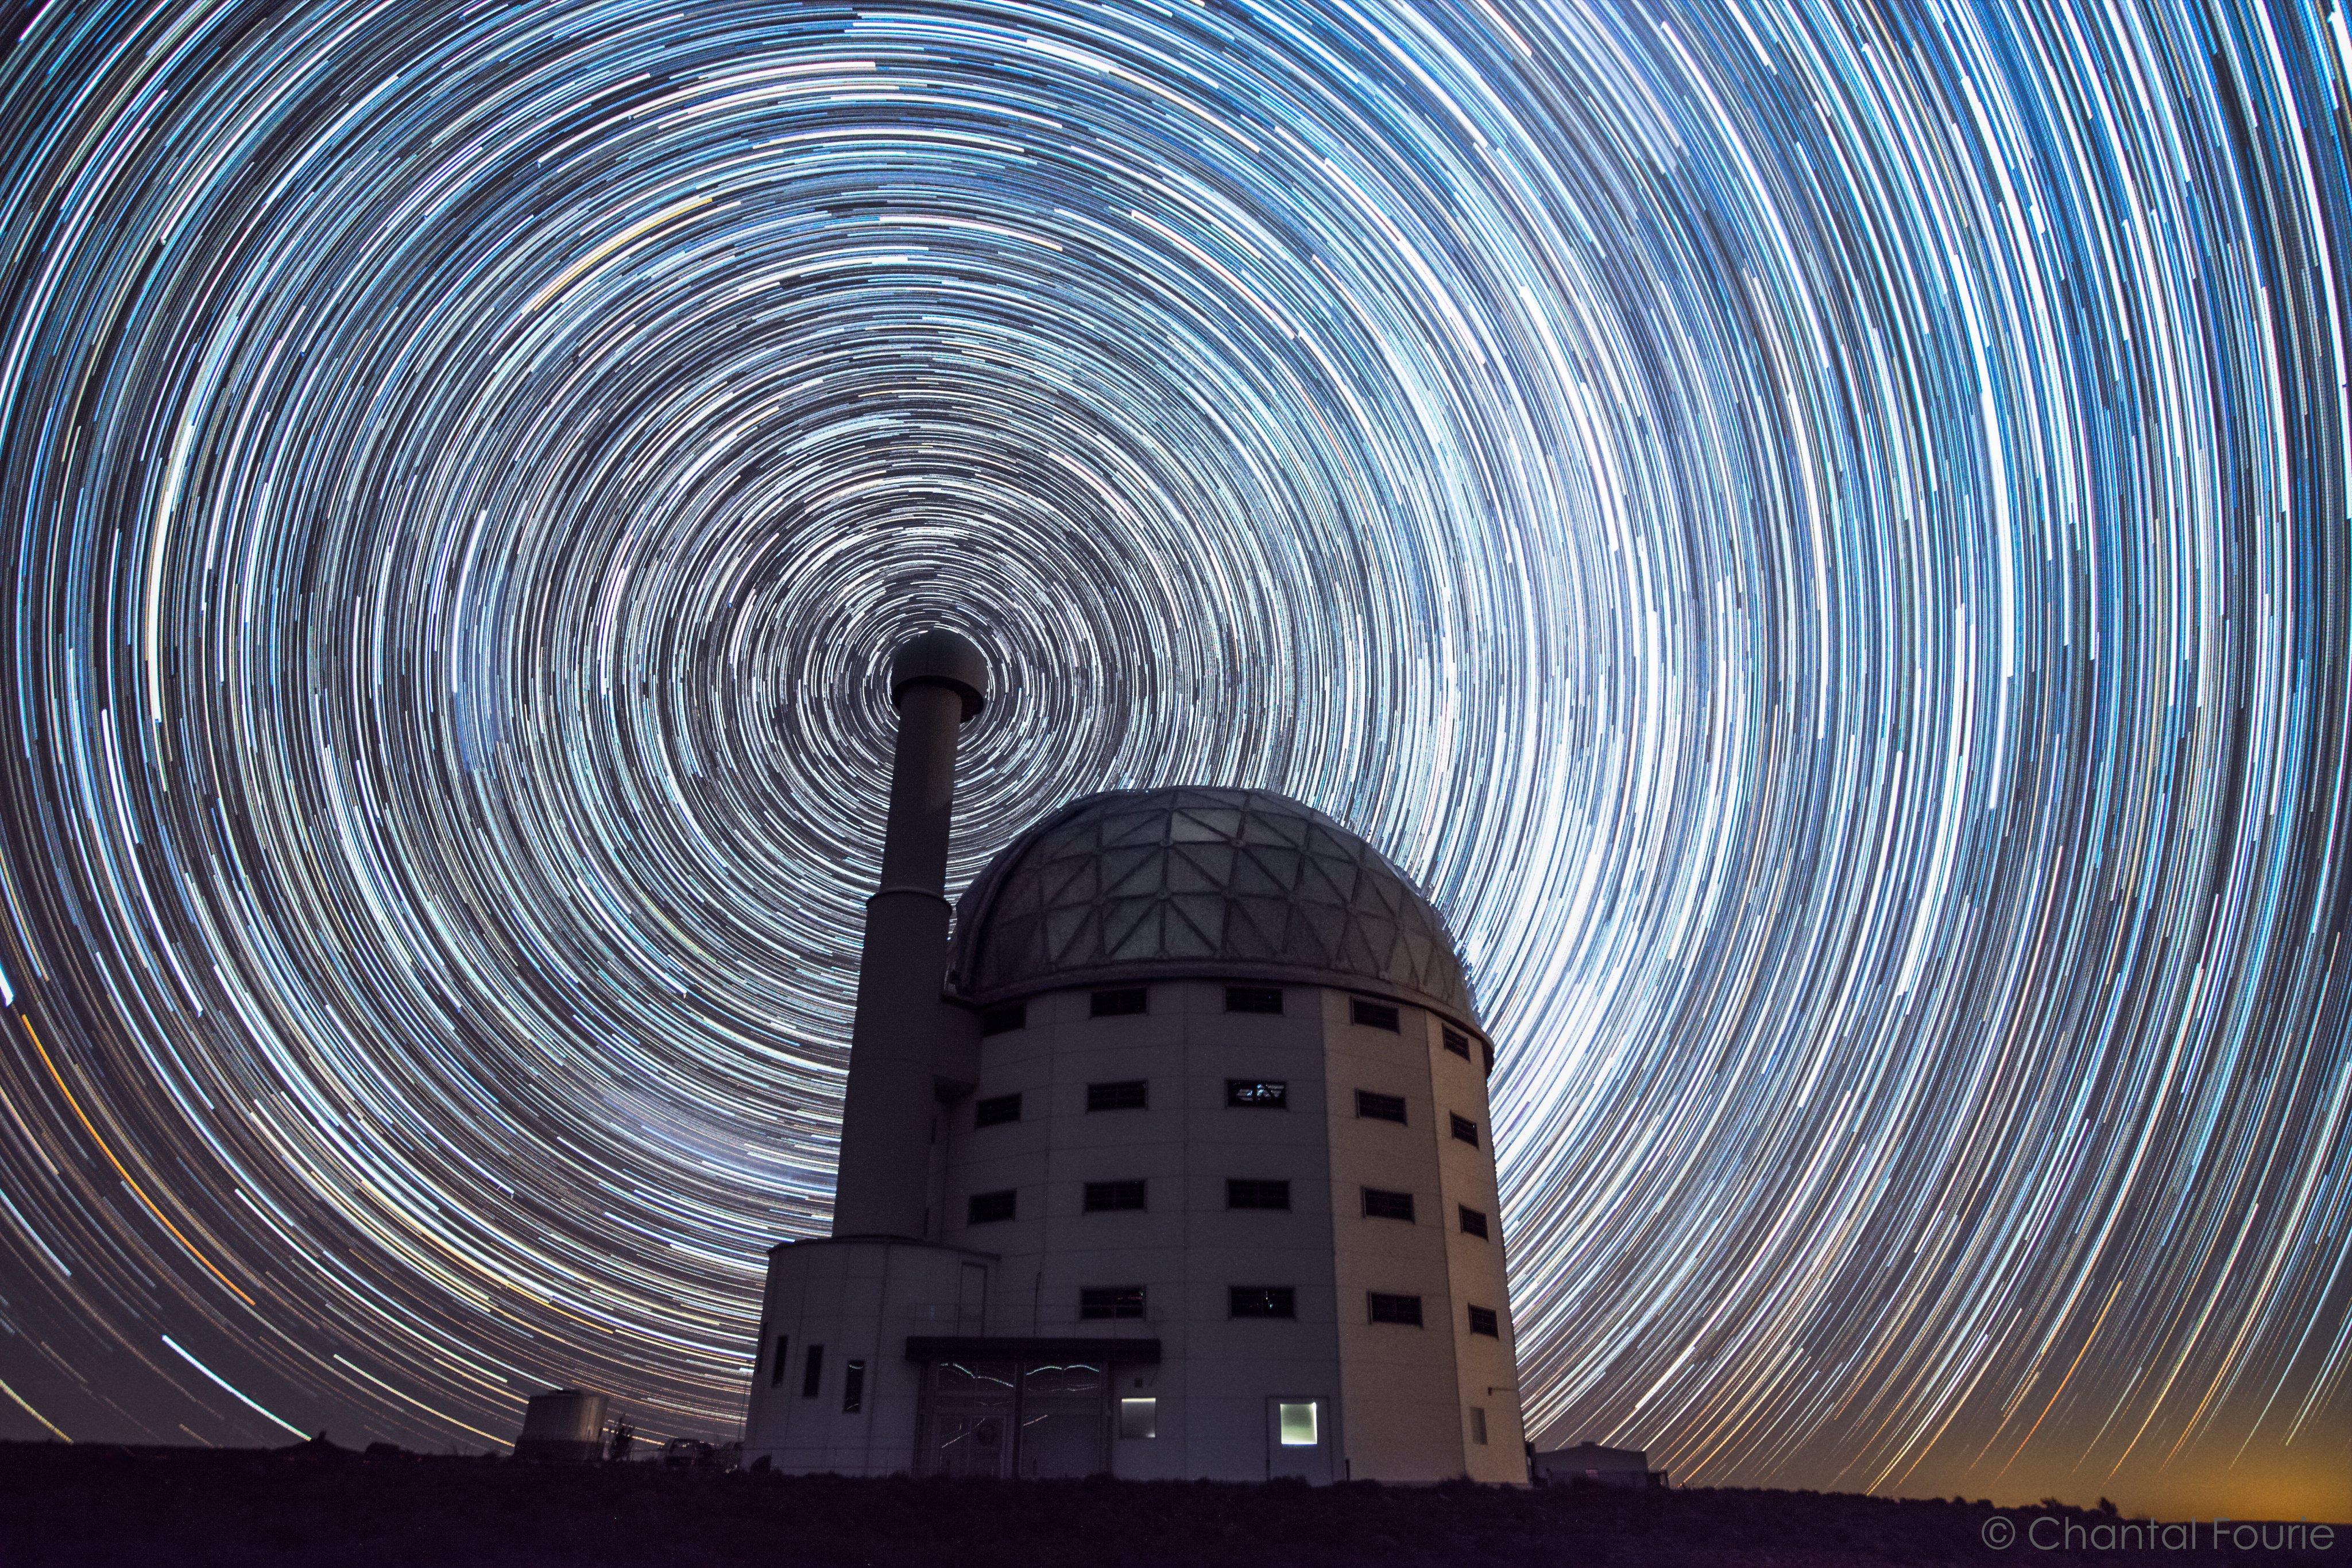 Chantal Fourie on Twitter: "Aligning the South Celestial Pole with the CCAS  tower of the SALT telescope #startrails #SALT #telescope #Sutherland  #astrophotography @SALT_Astro @SAAO https://t.co/FA46i1YJt0" / Twitter